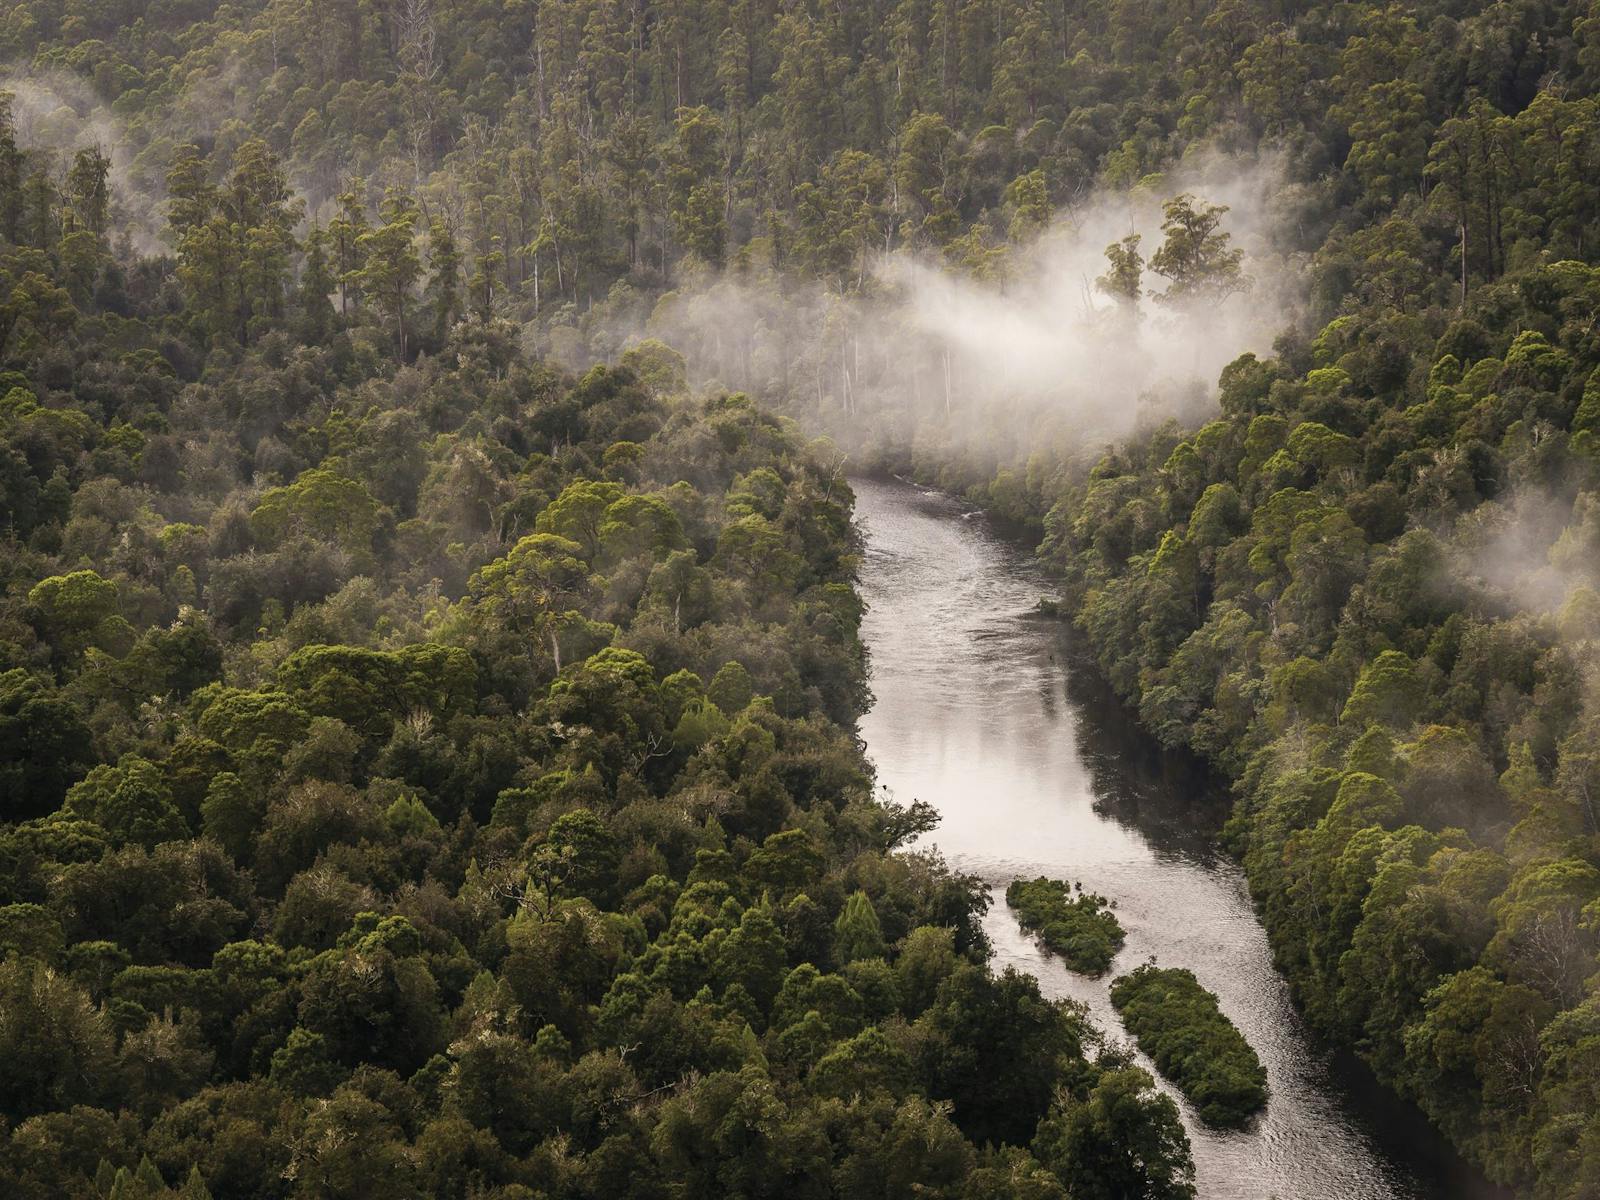 View of the Arthur River from Sumac Lookout